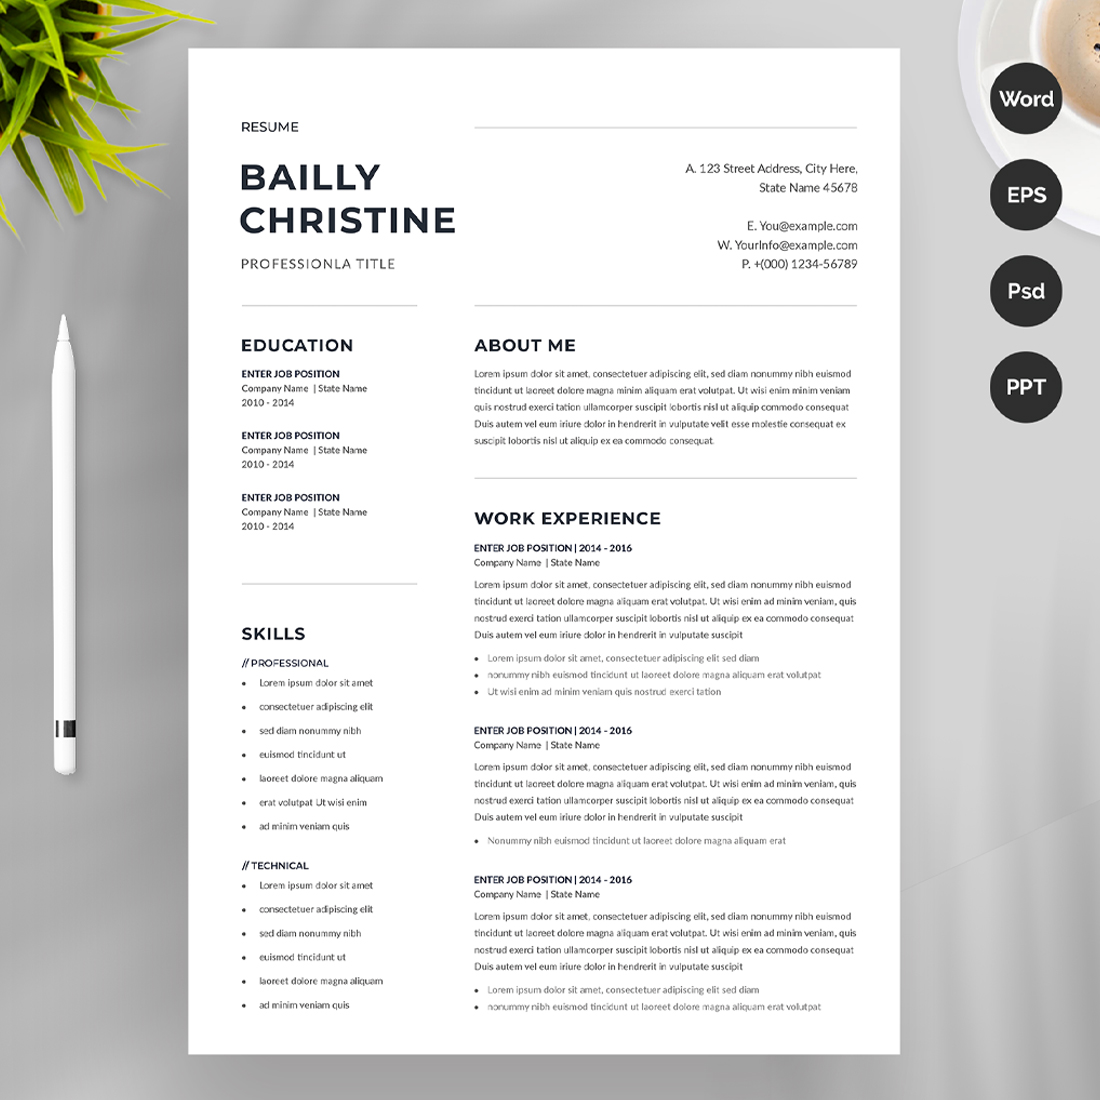 Minimalist Resume / CV Template image preview.